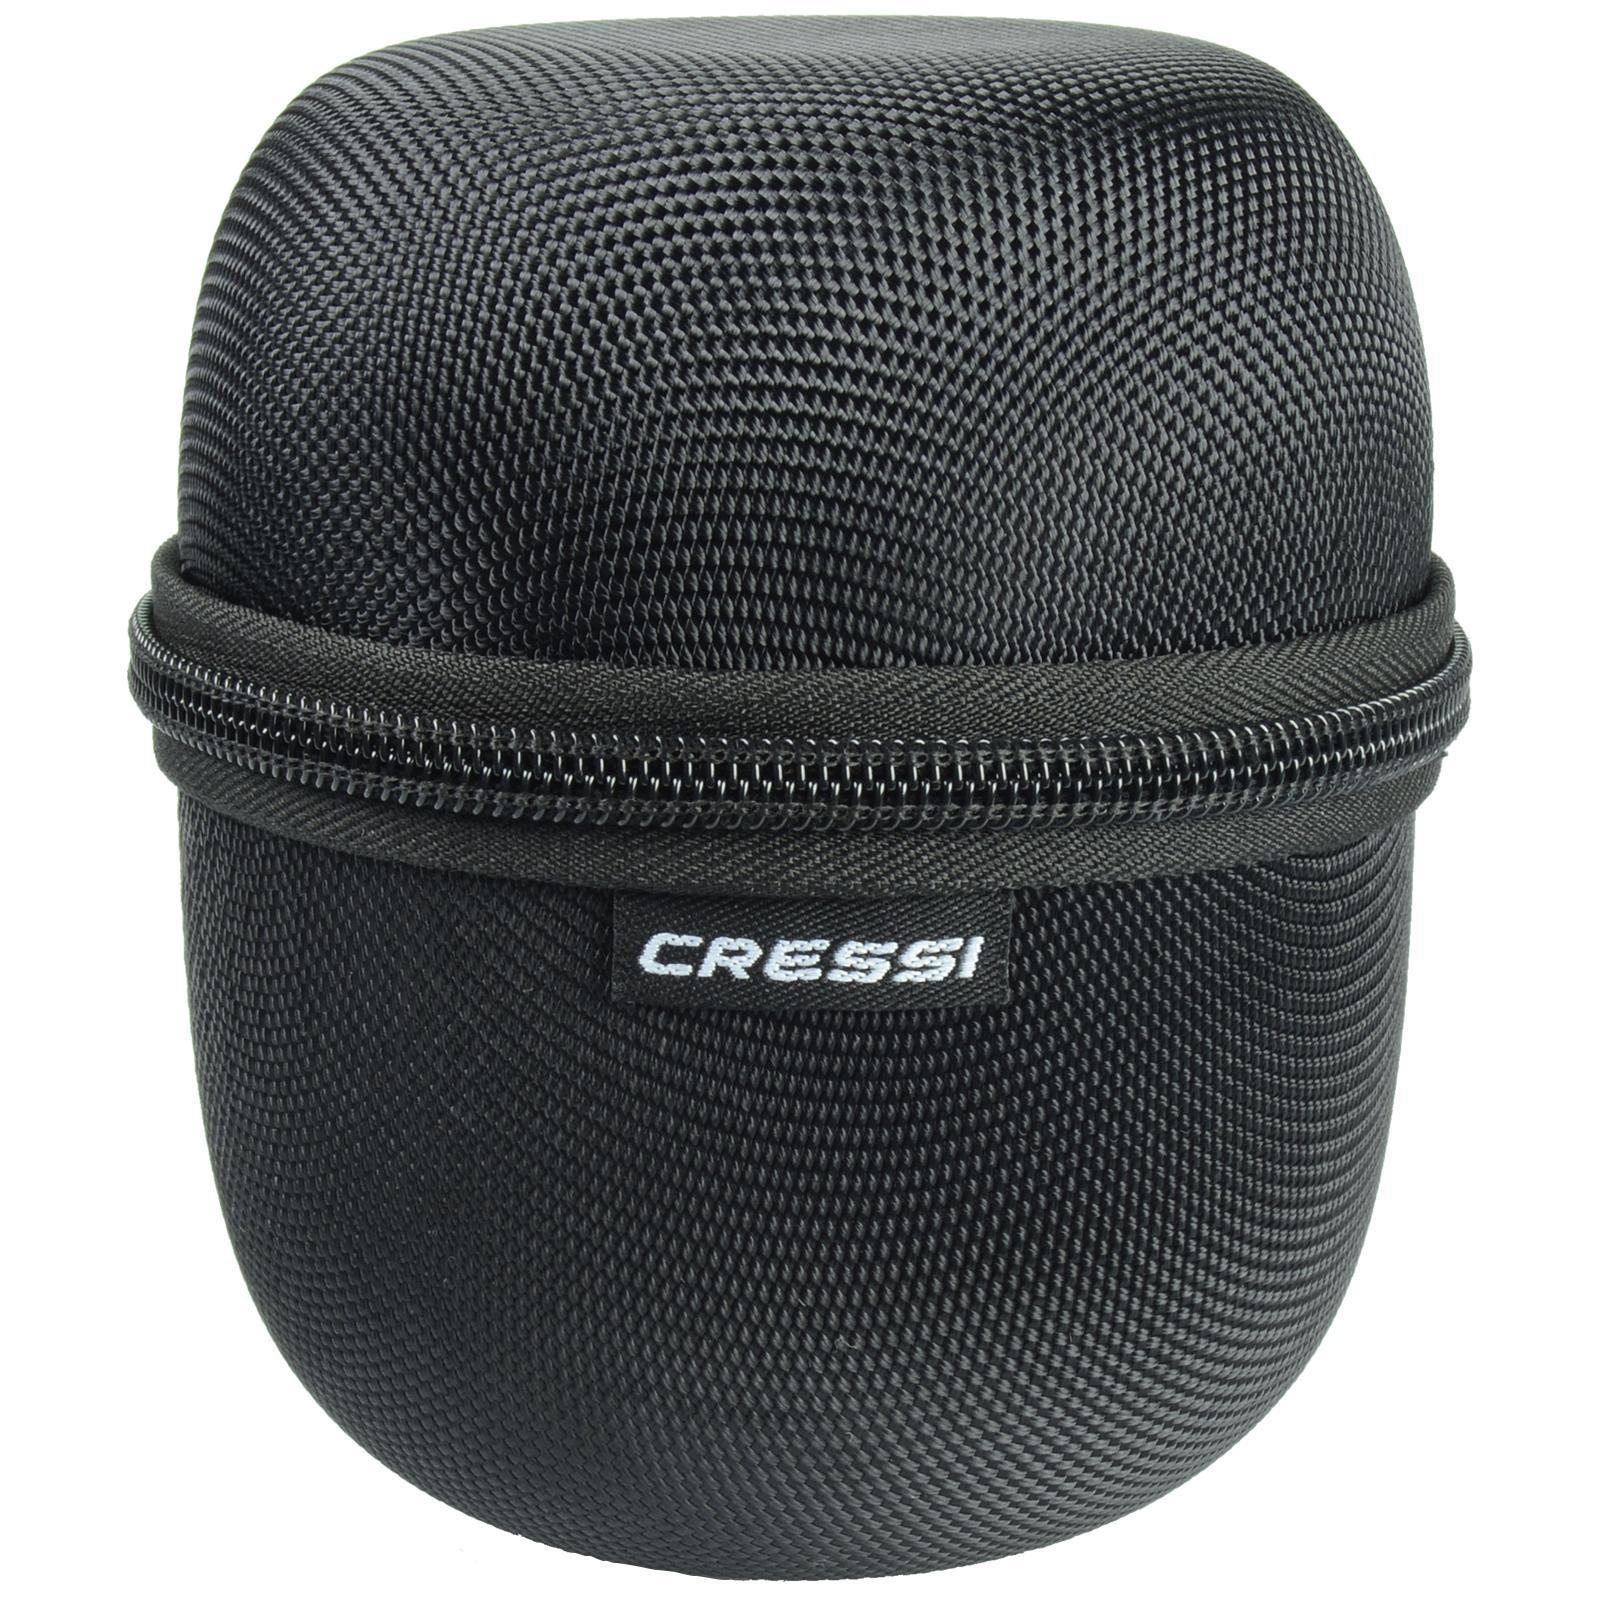 Cressi Dive Computer or Dive Watch Protective Case